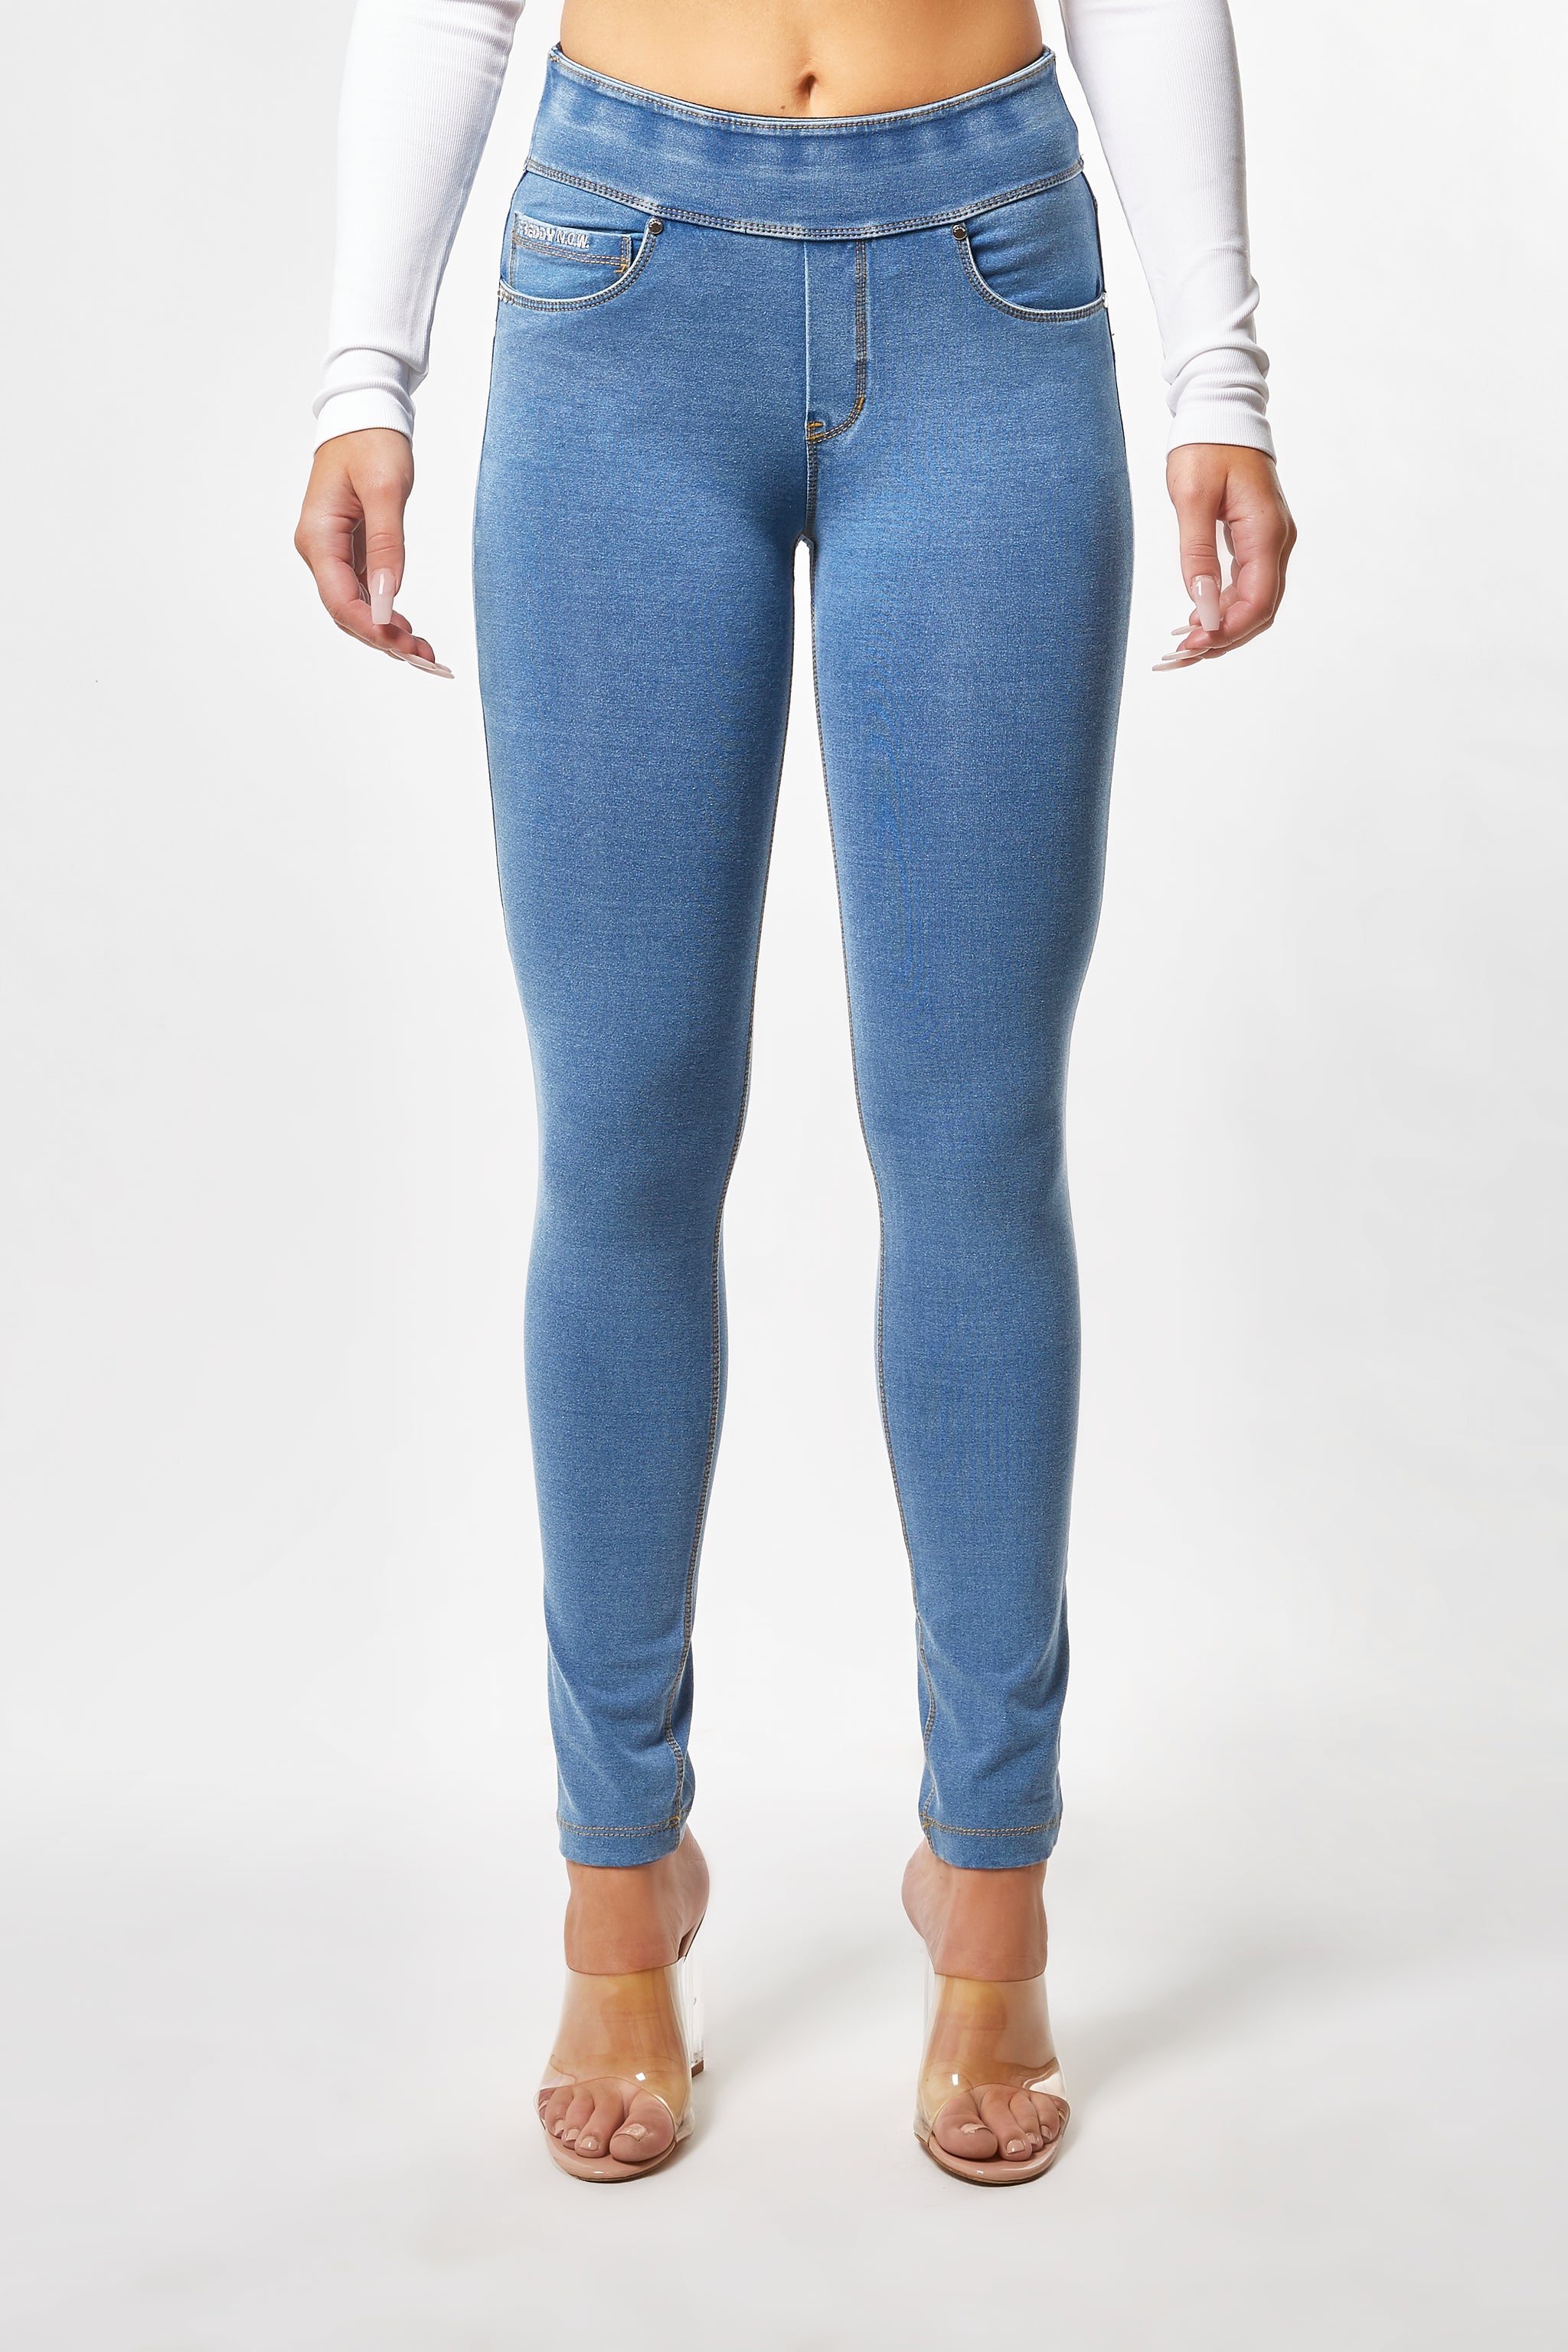 YMI Extreme Jeans Stretch Denim Leggings • The Fashionable Housewife